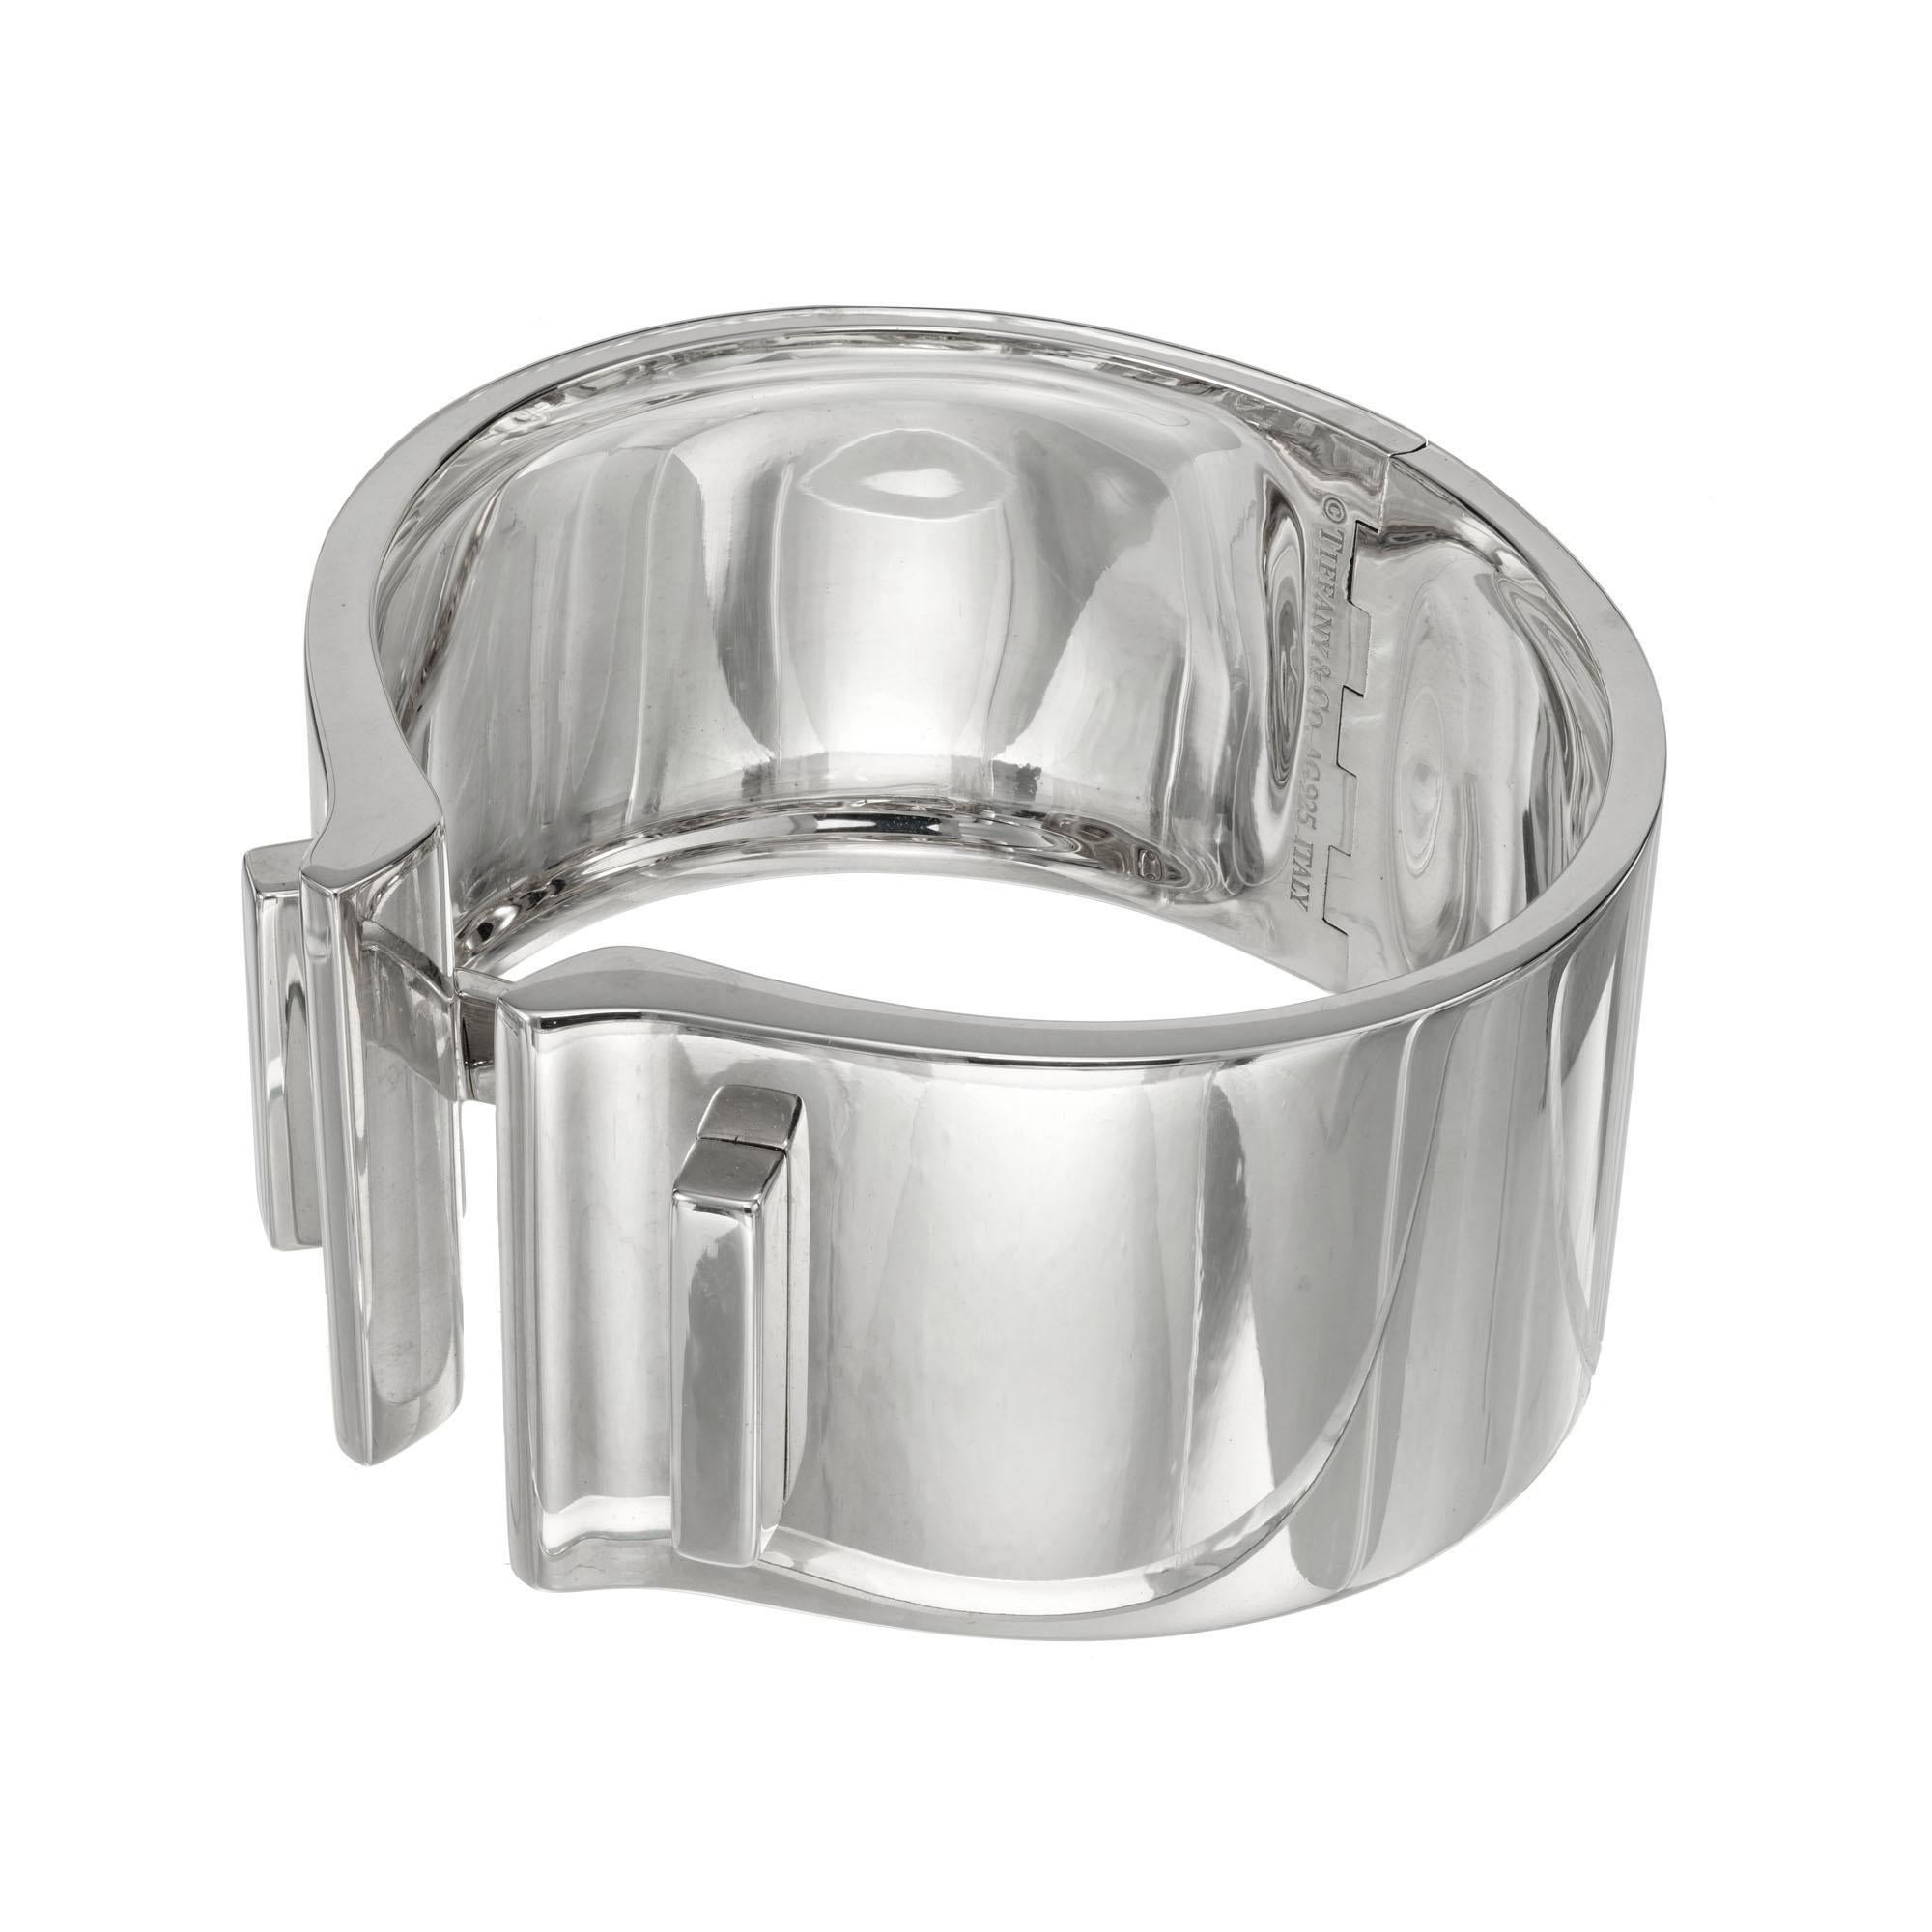 Tiffany & Co Sterling Silver bone cuff bangle bracelet. Tiffany box and pouch included. Fits a 7 Inch wrist 

Sterling Silver
Stamped: AG925
Hallmark: Tiffany & Co 
135.5 grams
Width: 34.55mm
Thickness/depth: 2.7mm - 15.0mm
Inside dimensions: 2.5